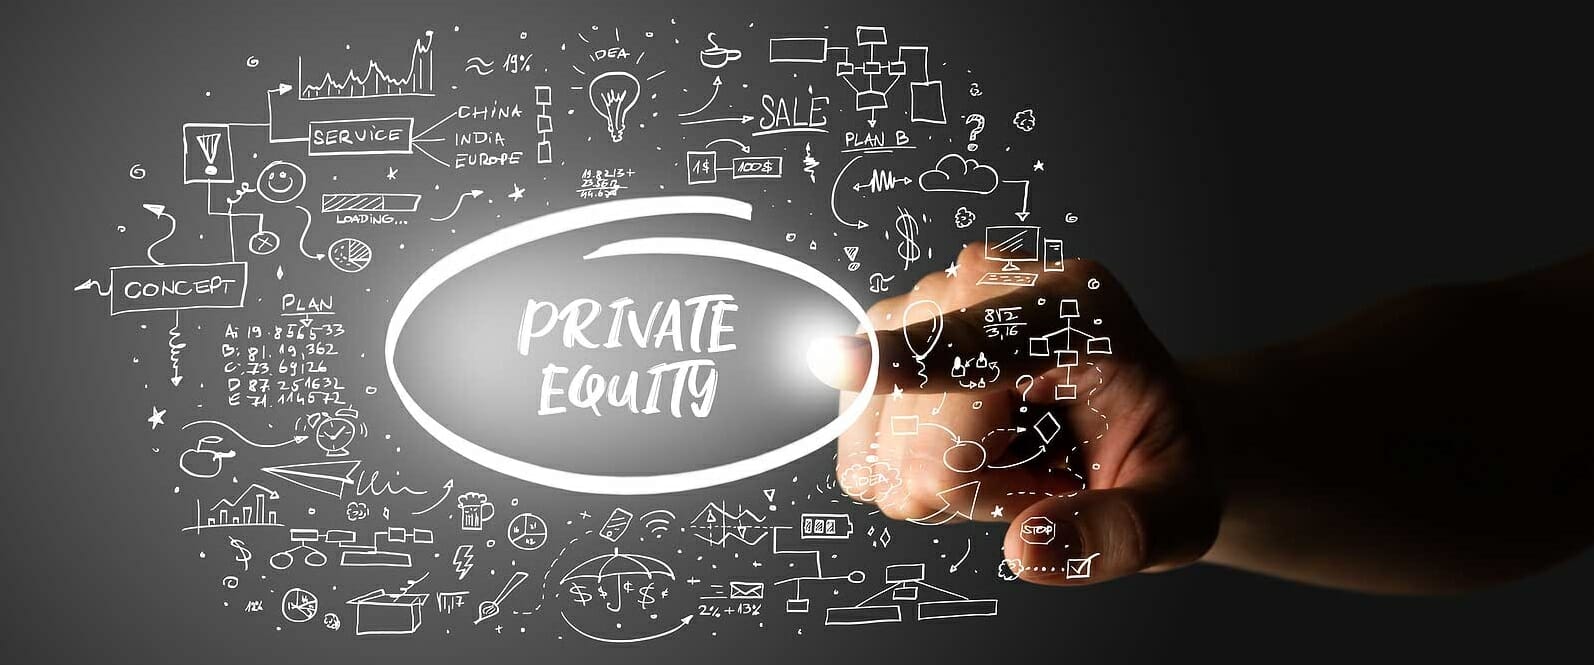 Featured image for “Private Equity and Women”